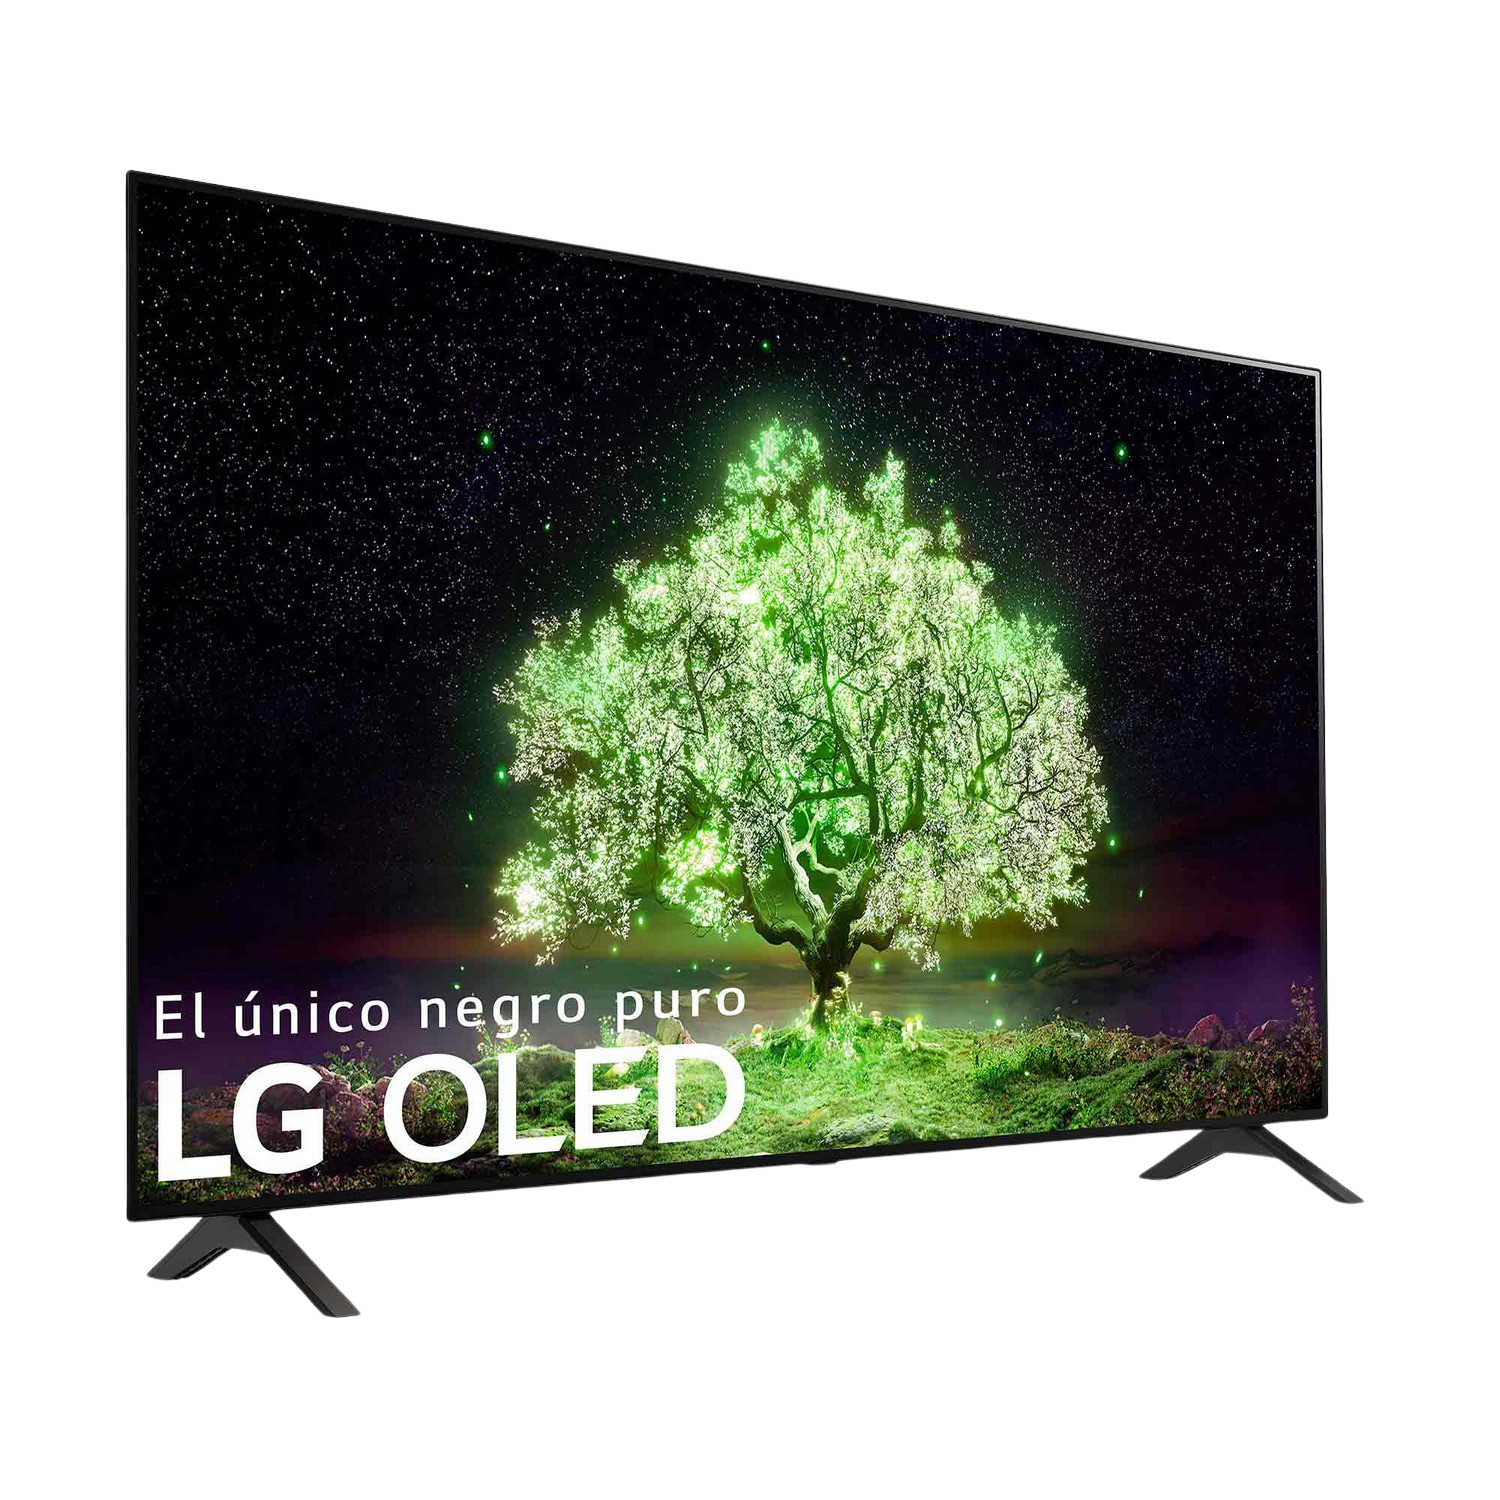 TV OLED 55" - LG OLED55A16LA, SmartTV webOS 6.0, 4K α7 Gen4 con AI, HDR Dolby Vision, Dolby Atmos, Negro